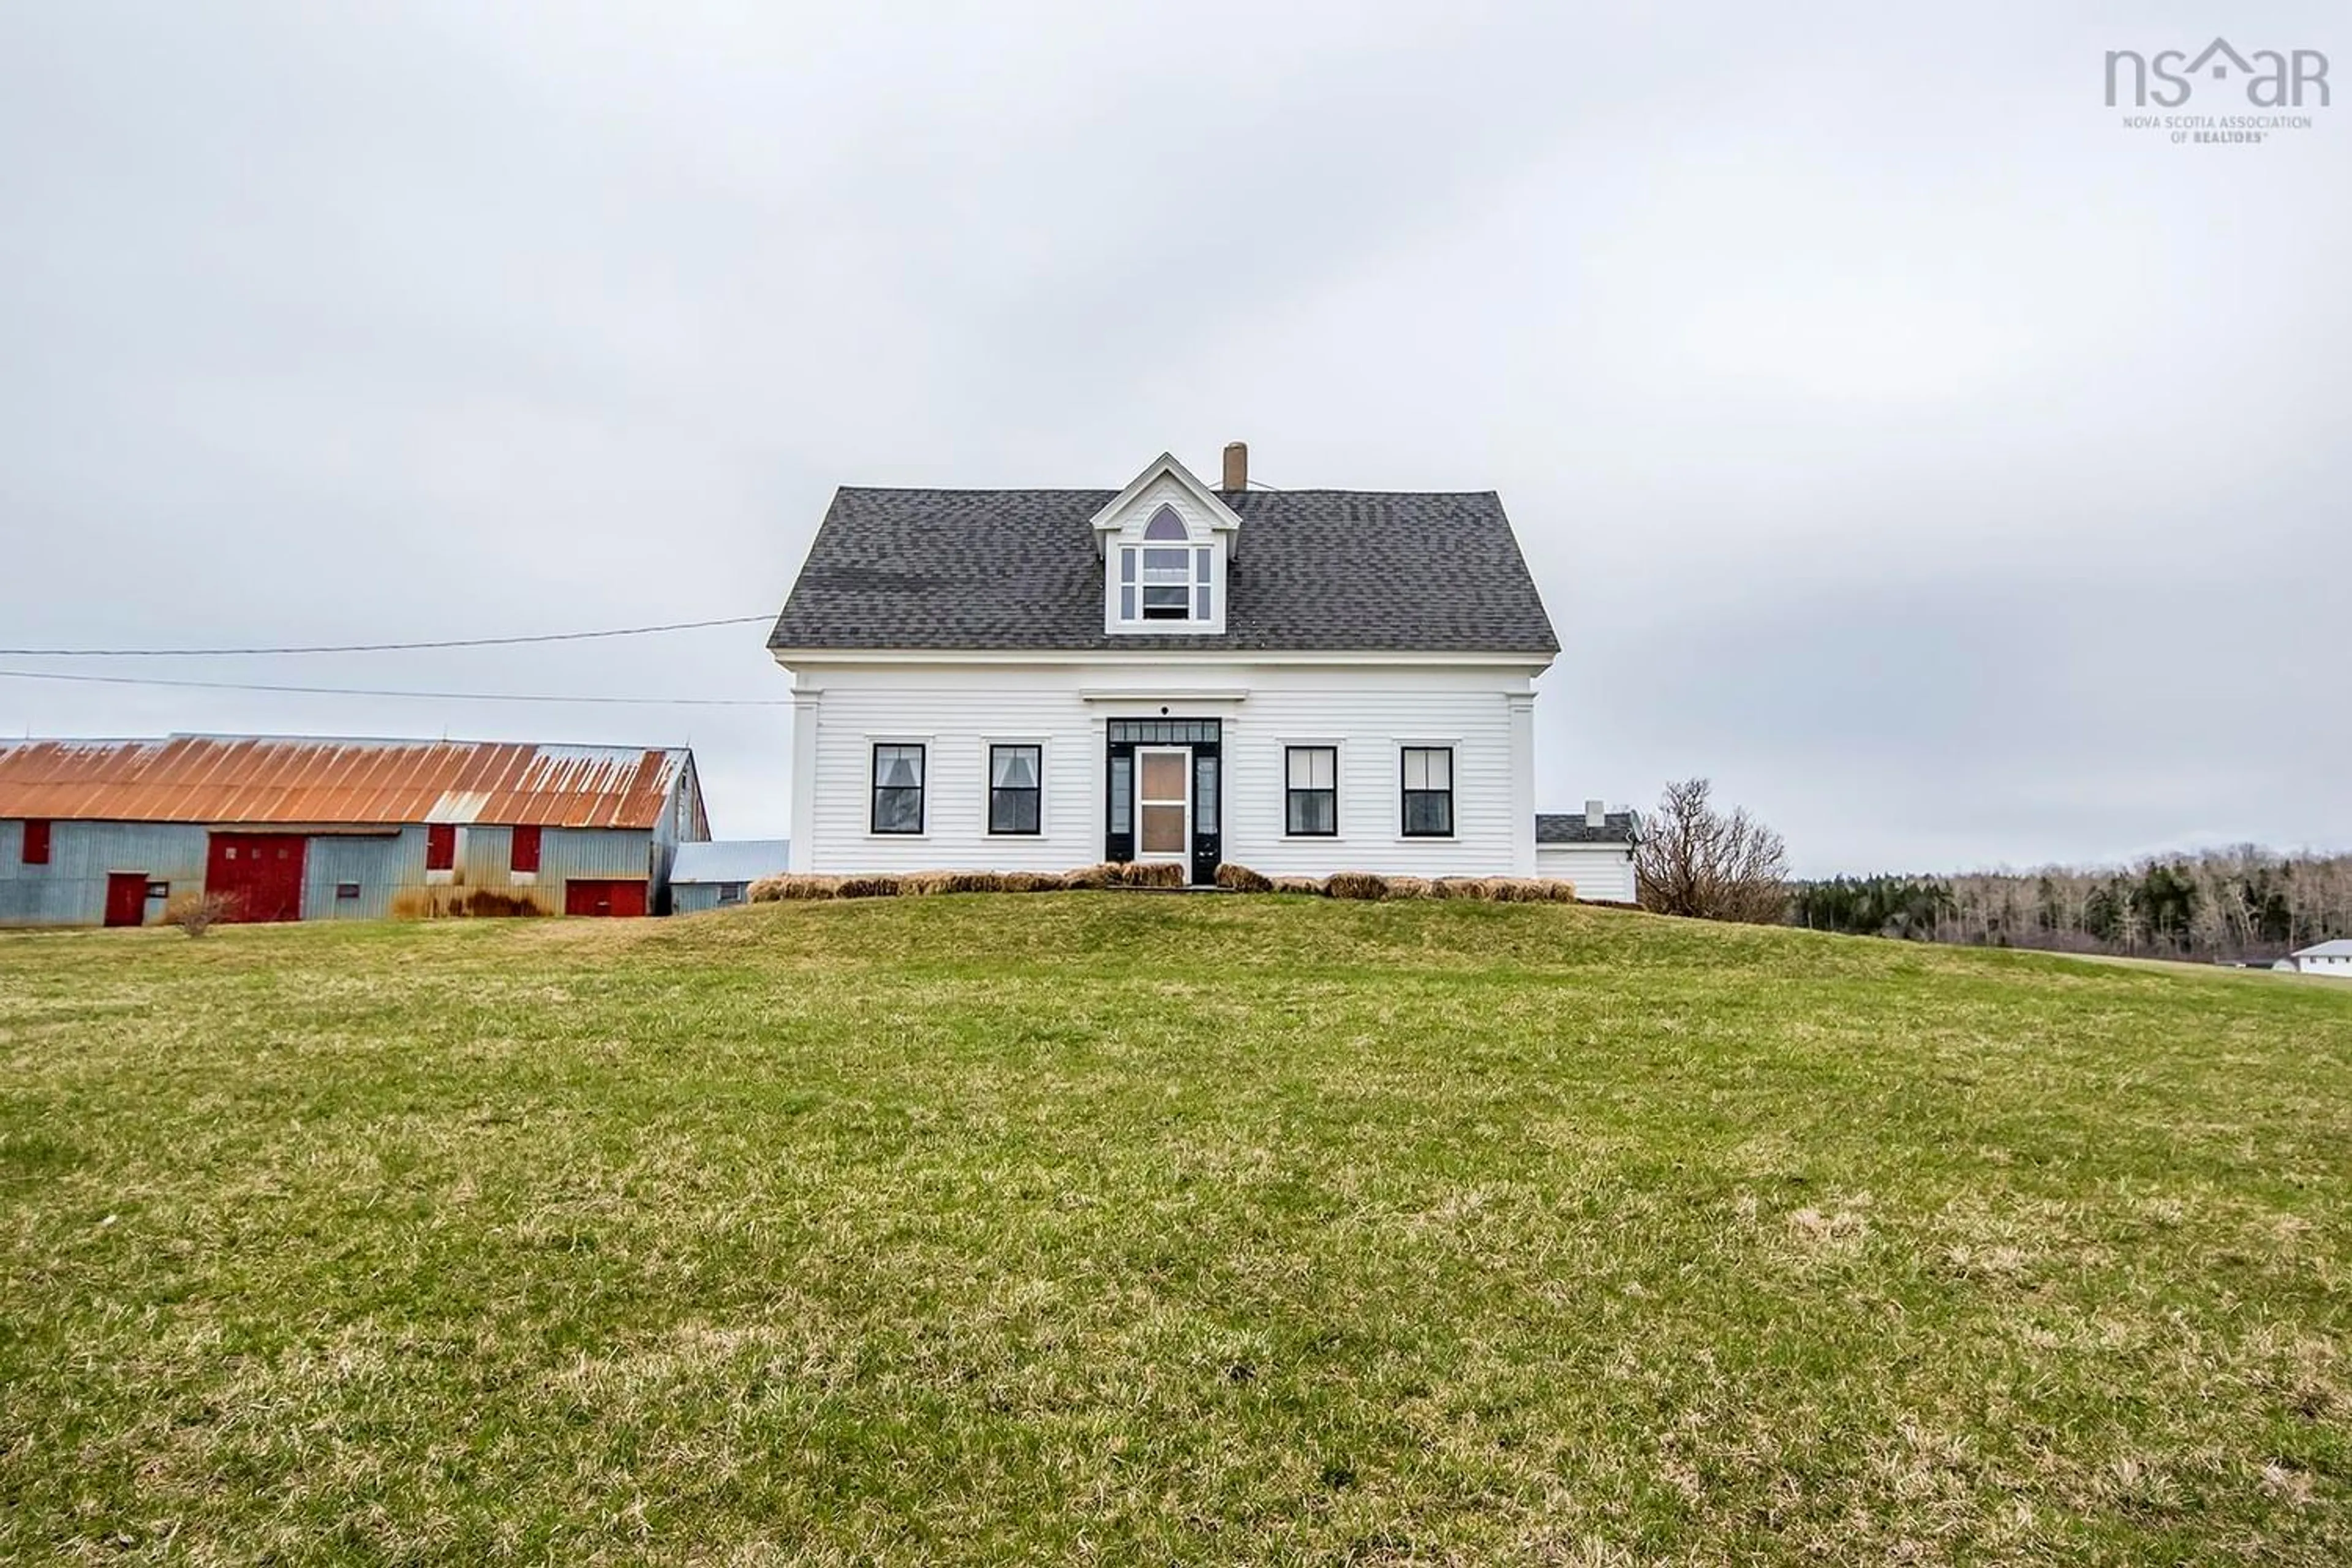 Cottage for 702 East Tracadie Rd, East Tracadie Nova Scotia B0H 1W0